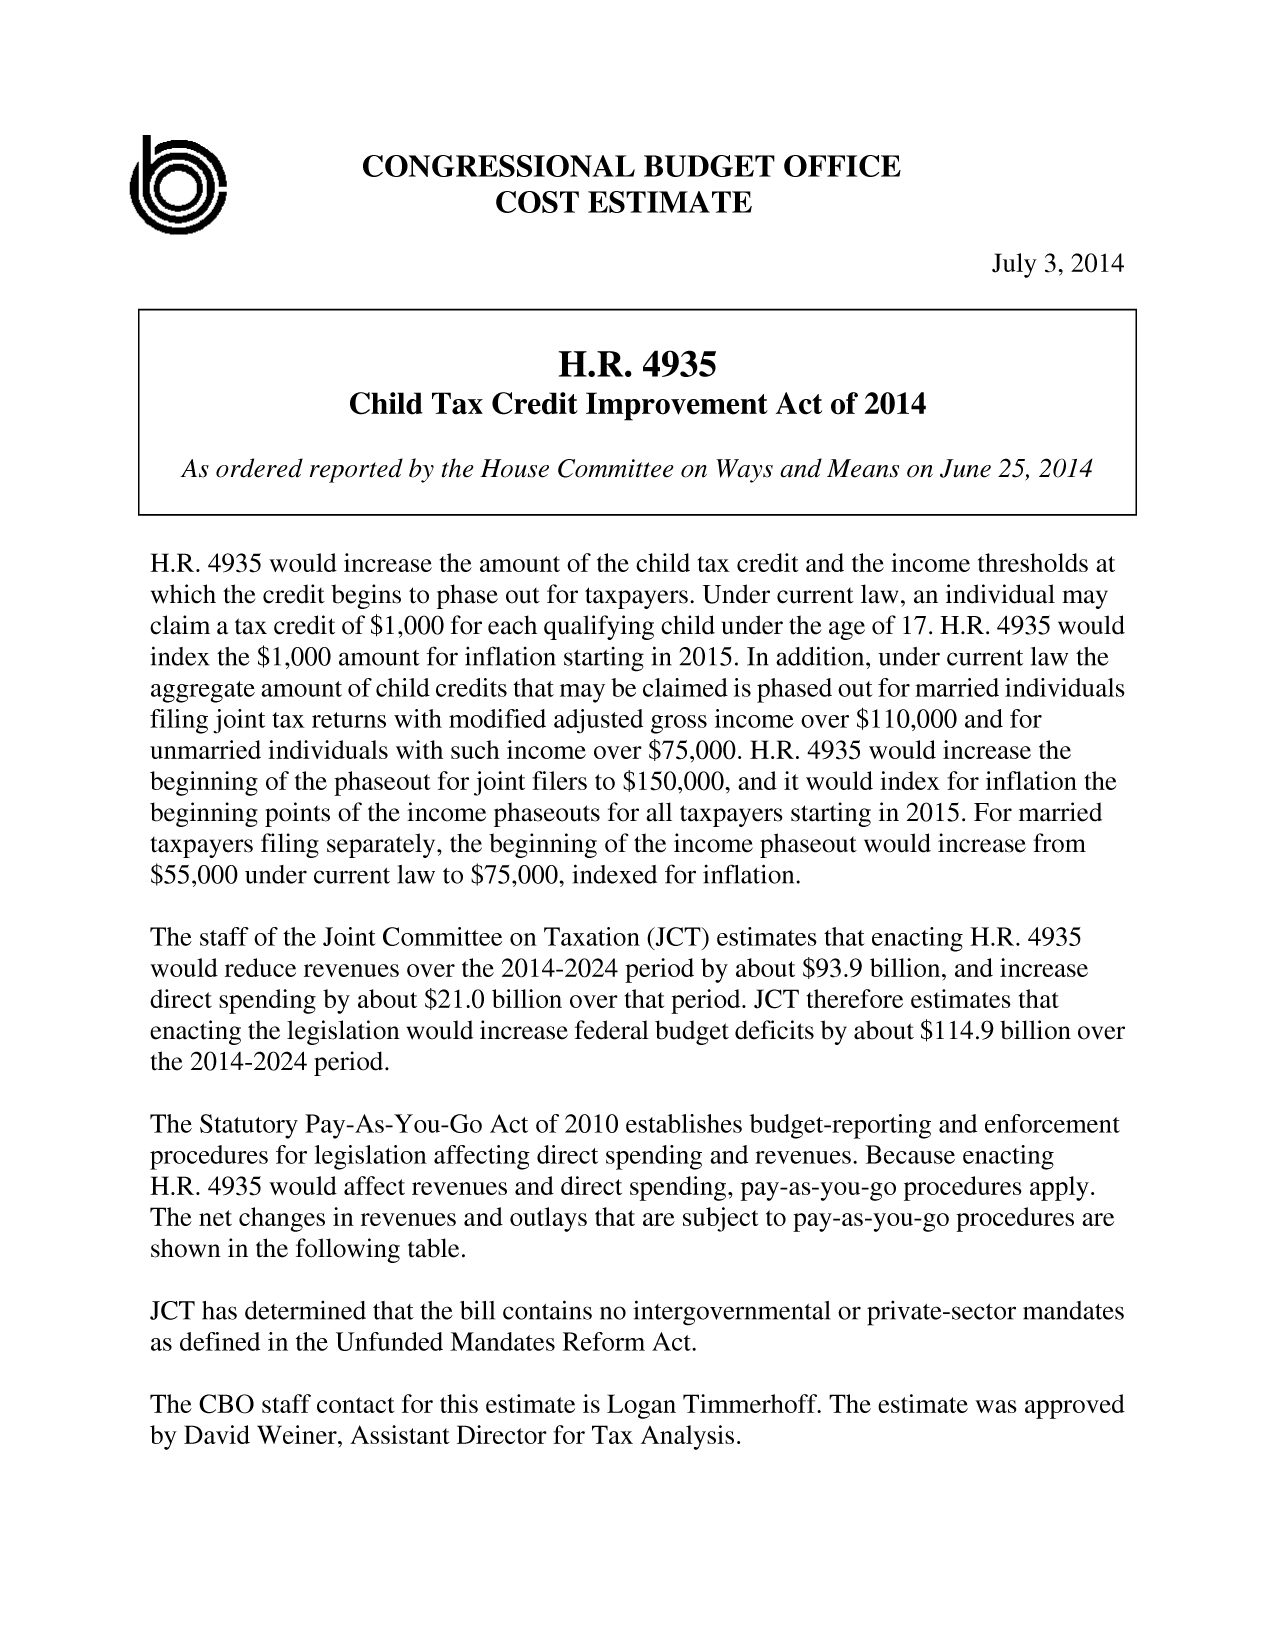 handle is hein.congrec/cbo1758 and id is 1 raw text is: CONGRESSIONAL BUDGET OFFICE
COST ESTIMATE
July 3, 2014
H.R. 4935
Child Tax Credit Improvement Act of 2014
As ordered reported by the House Committee on Ways and Means on June 25, 2014
H.R. 4935 would increase the amount of the child tax credit and the income thresholds at
which the credit begins to phase out for taxpayers. Under current law, an individual may
claim a tax credit of $1,000 for each qualifying child under the age of 17. H.R. 4935 would
index the $1,000 amount for inflation starting in 2015. In addition, under current law the
aggregate amount of child credits that may be claimed is phased out for married individuals
filing joint tax returns with modified adjusted gross income over $110,000 and for
unmarried individuals with such income over $75,000. H.R. 4935 would increase the
beginning of the phaseout for joint filers to $150,000, and it would index for inflation the
beginning points of the income phaseouts for all taxpayers starting in 2015. For married
taxpayers filing separately, the beginning of the income phaseout would increase from
$55,000 under current law to $75,000, indexed for inflation.
The staff of the Joint Committee on Taxation (JCT) estimates that enacting H.R. 4935
would reduce revenues over the 2014-2024 period by about $93.9 billion, and increase
direct spending by about $21.0 billion over that period. JCT therefore estimates that
enacting the legislation would increase federal budget deficits by about $114.9 billion over
the 2014-2024 period.
The Statutory Pay-As-You-Go Act of 2010 establishes budget-reporting and enforcement
procedures for legislation affecting direct spending and revenues. Because enacting
H.R. 4935 would affect revenues and direct spending, pay-as-you-go procedures apply.
The net changes in revenues and outlays that are subject to pay-as-you-go procedures are
shown in the following table.
JCT has determined that the bill contains no intergovernmental or private-sector mandates
as defined in the Unfunded Mandates Reform Act.
The CBO staff contact for this estimate is Logan Timmerhoff. The estimate was approved
by David Weiner, Assistant Director for Tax Analysis.


